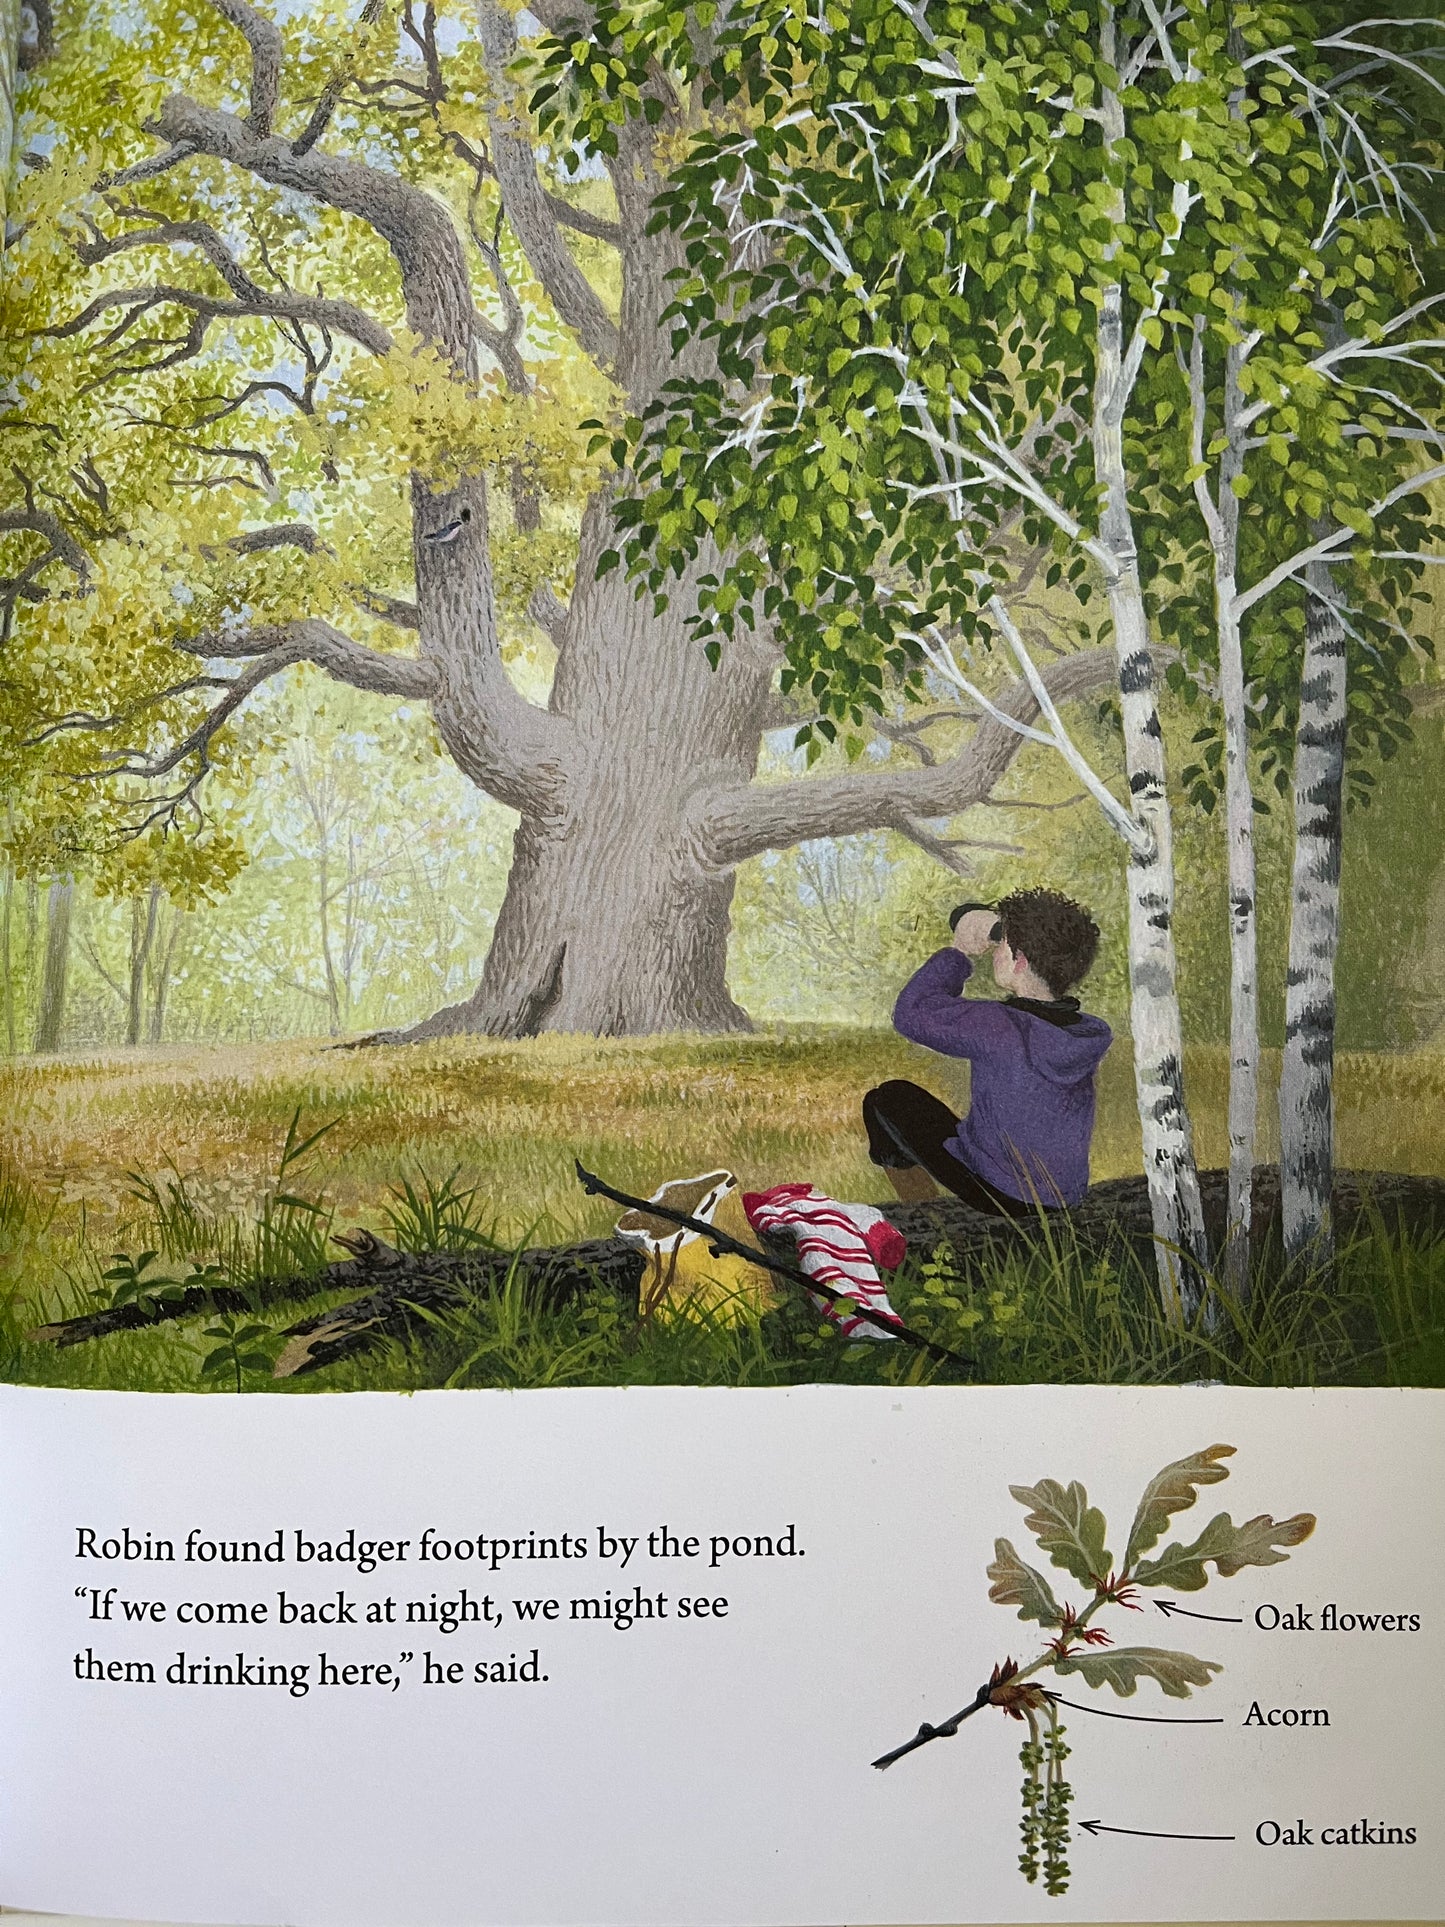 Educational Children's Picture Book - A YEAR AROUND THE GREAT OAK